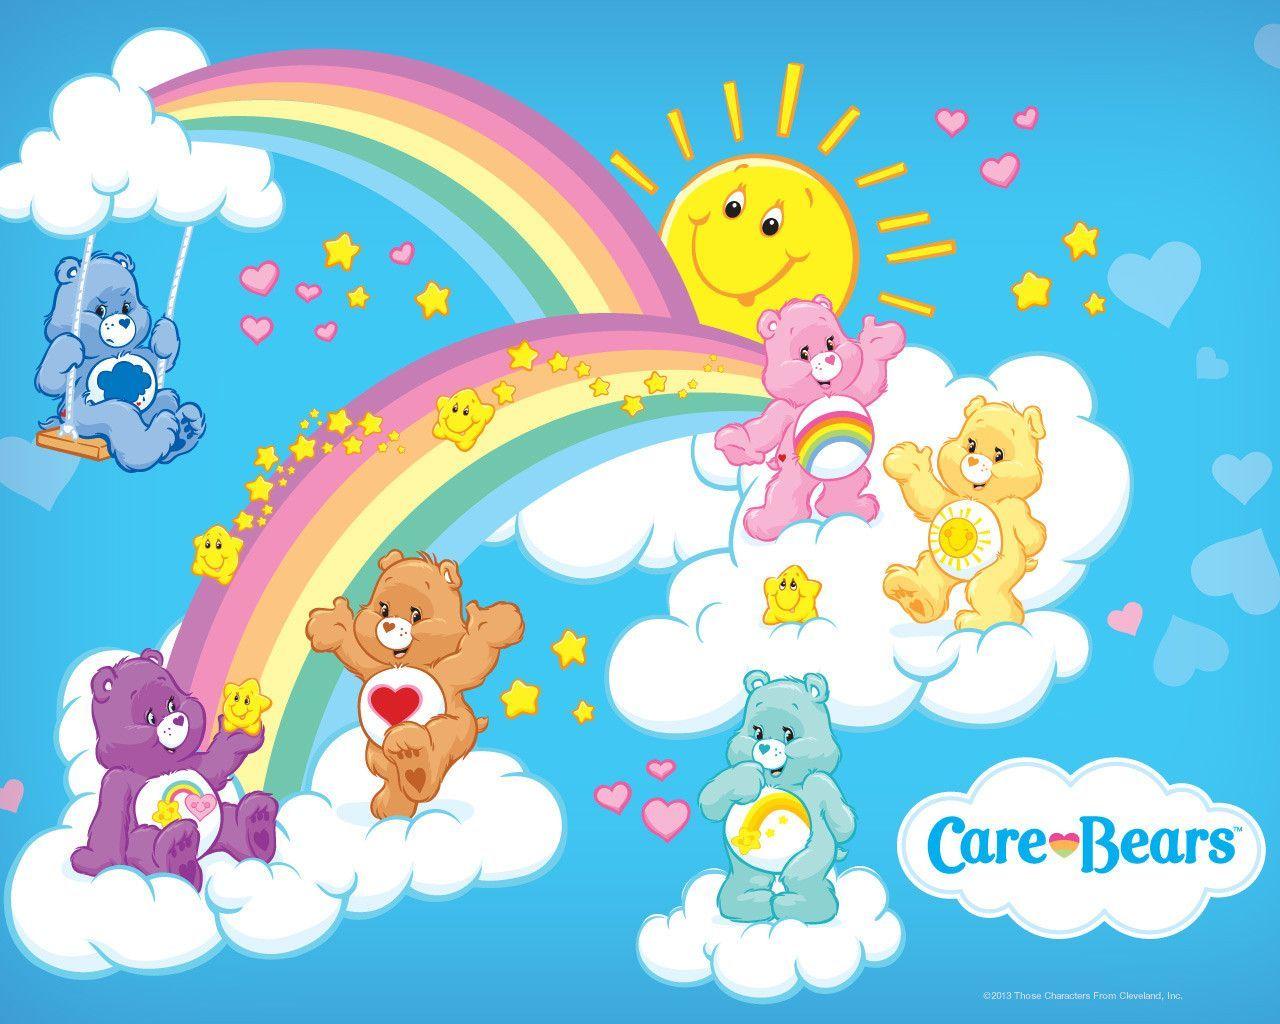 care bear wallpaper - Image And Wallpaper free to download